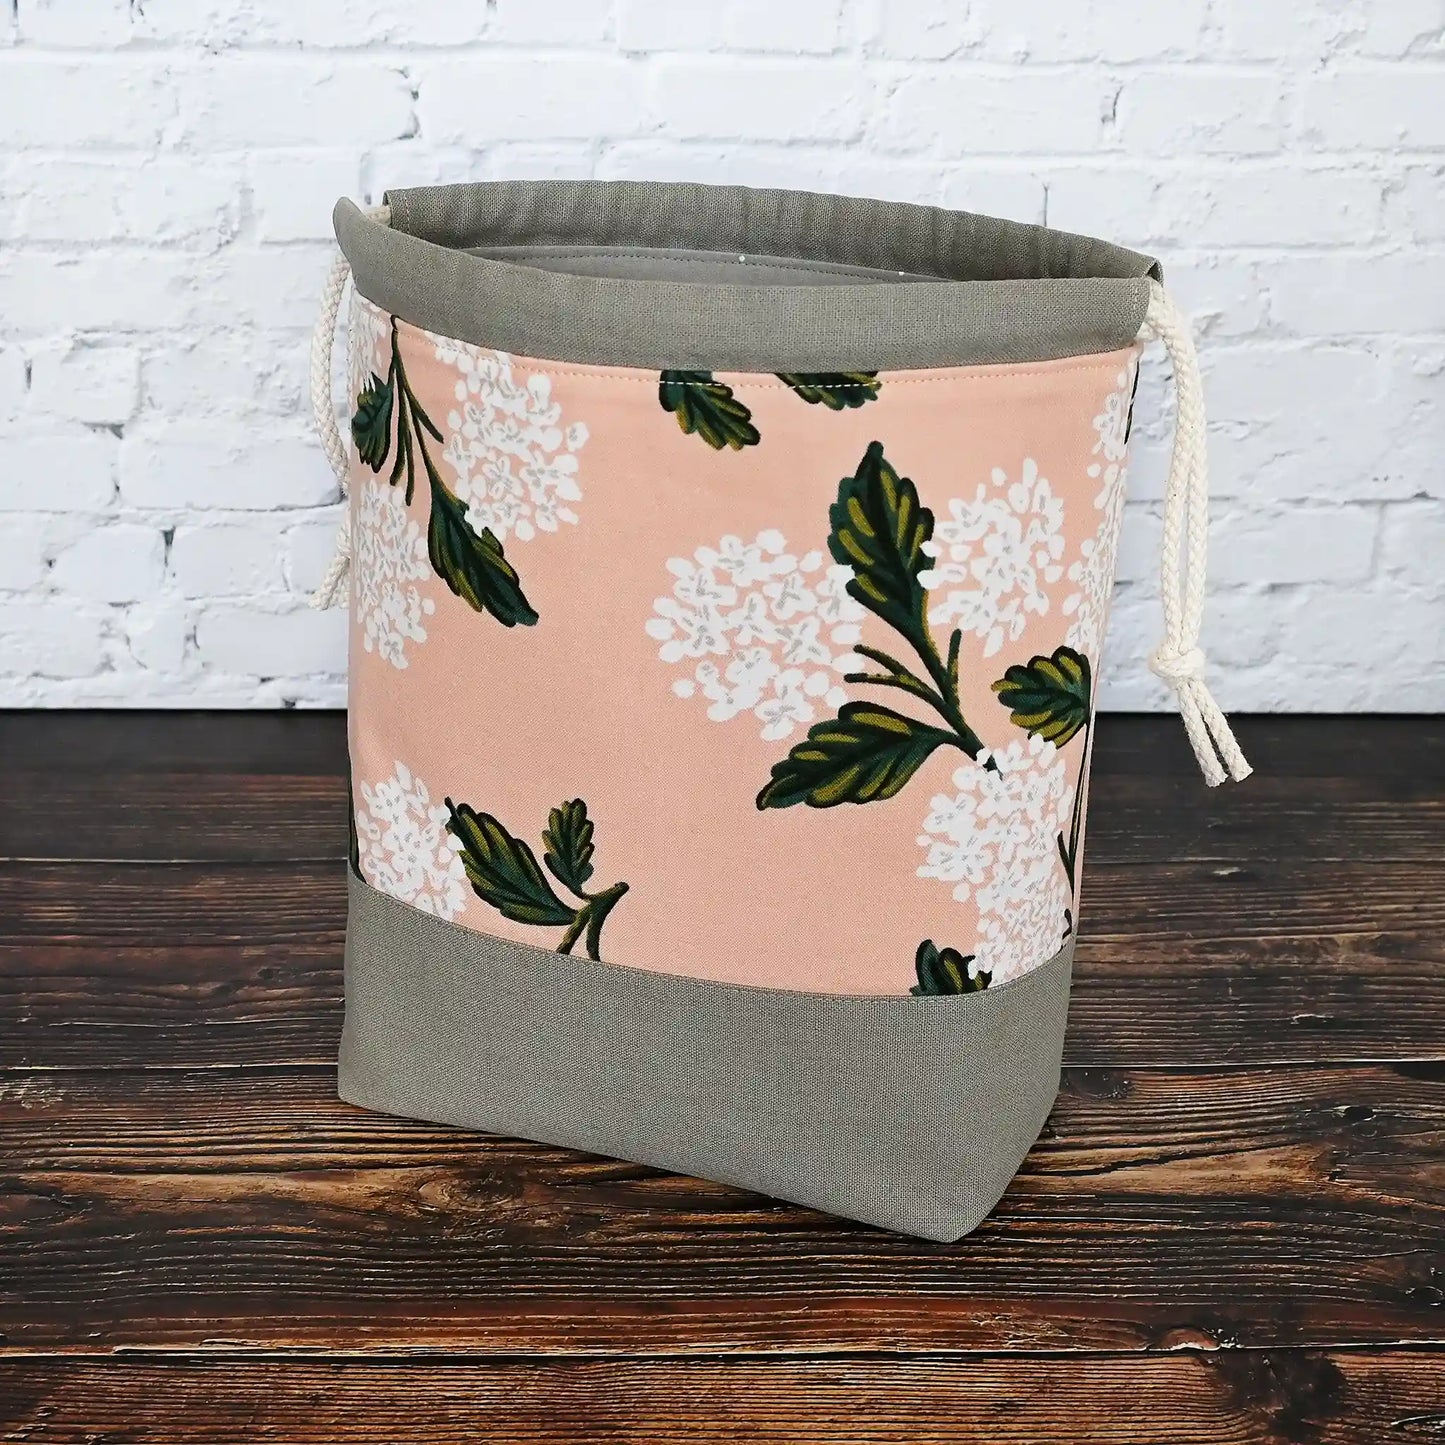 Pretty drawstring project bag made from a pretty peach hydrangea cotton from Rifle Paper Co and paired with a lovely putty coloured linen.  This bag has pockets inside and is lined in a putty coloured cotton with white spots.  Made in Canada by Yellow Petal Handmade.